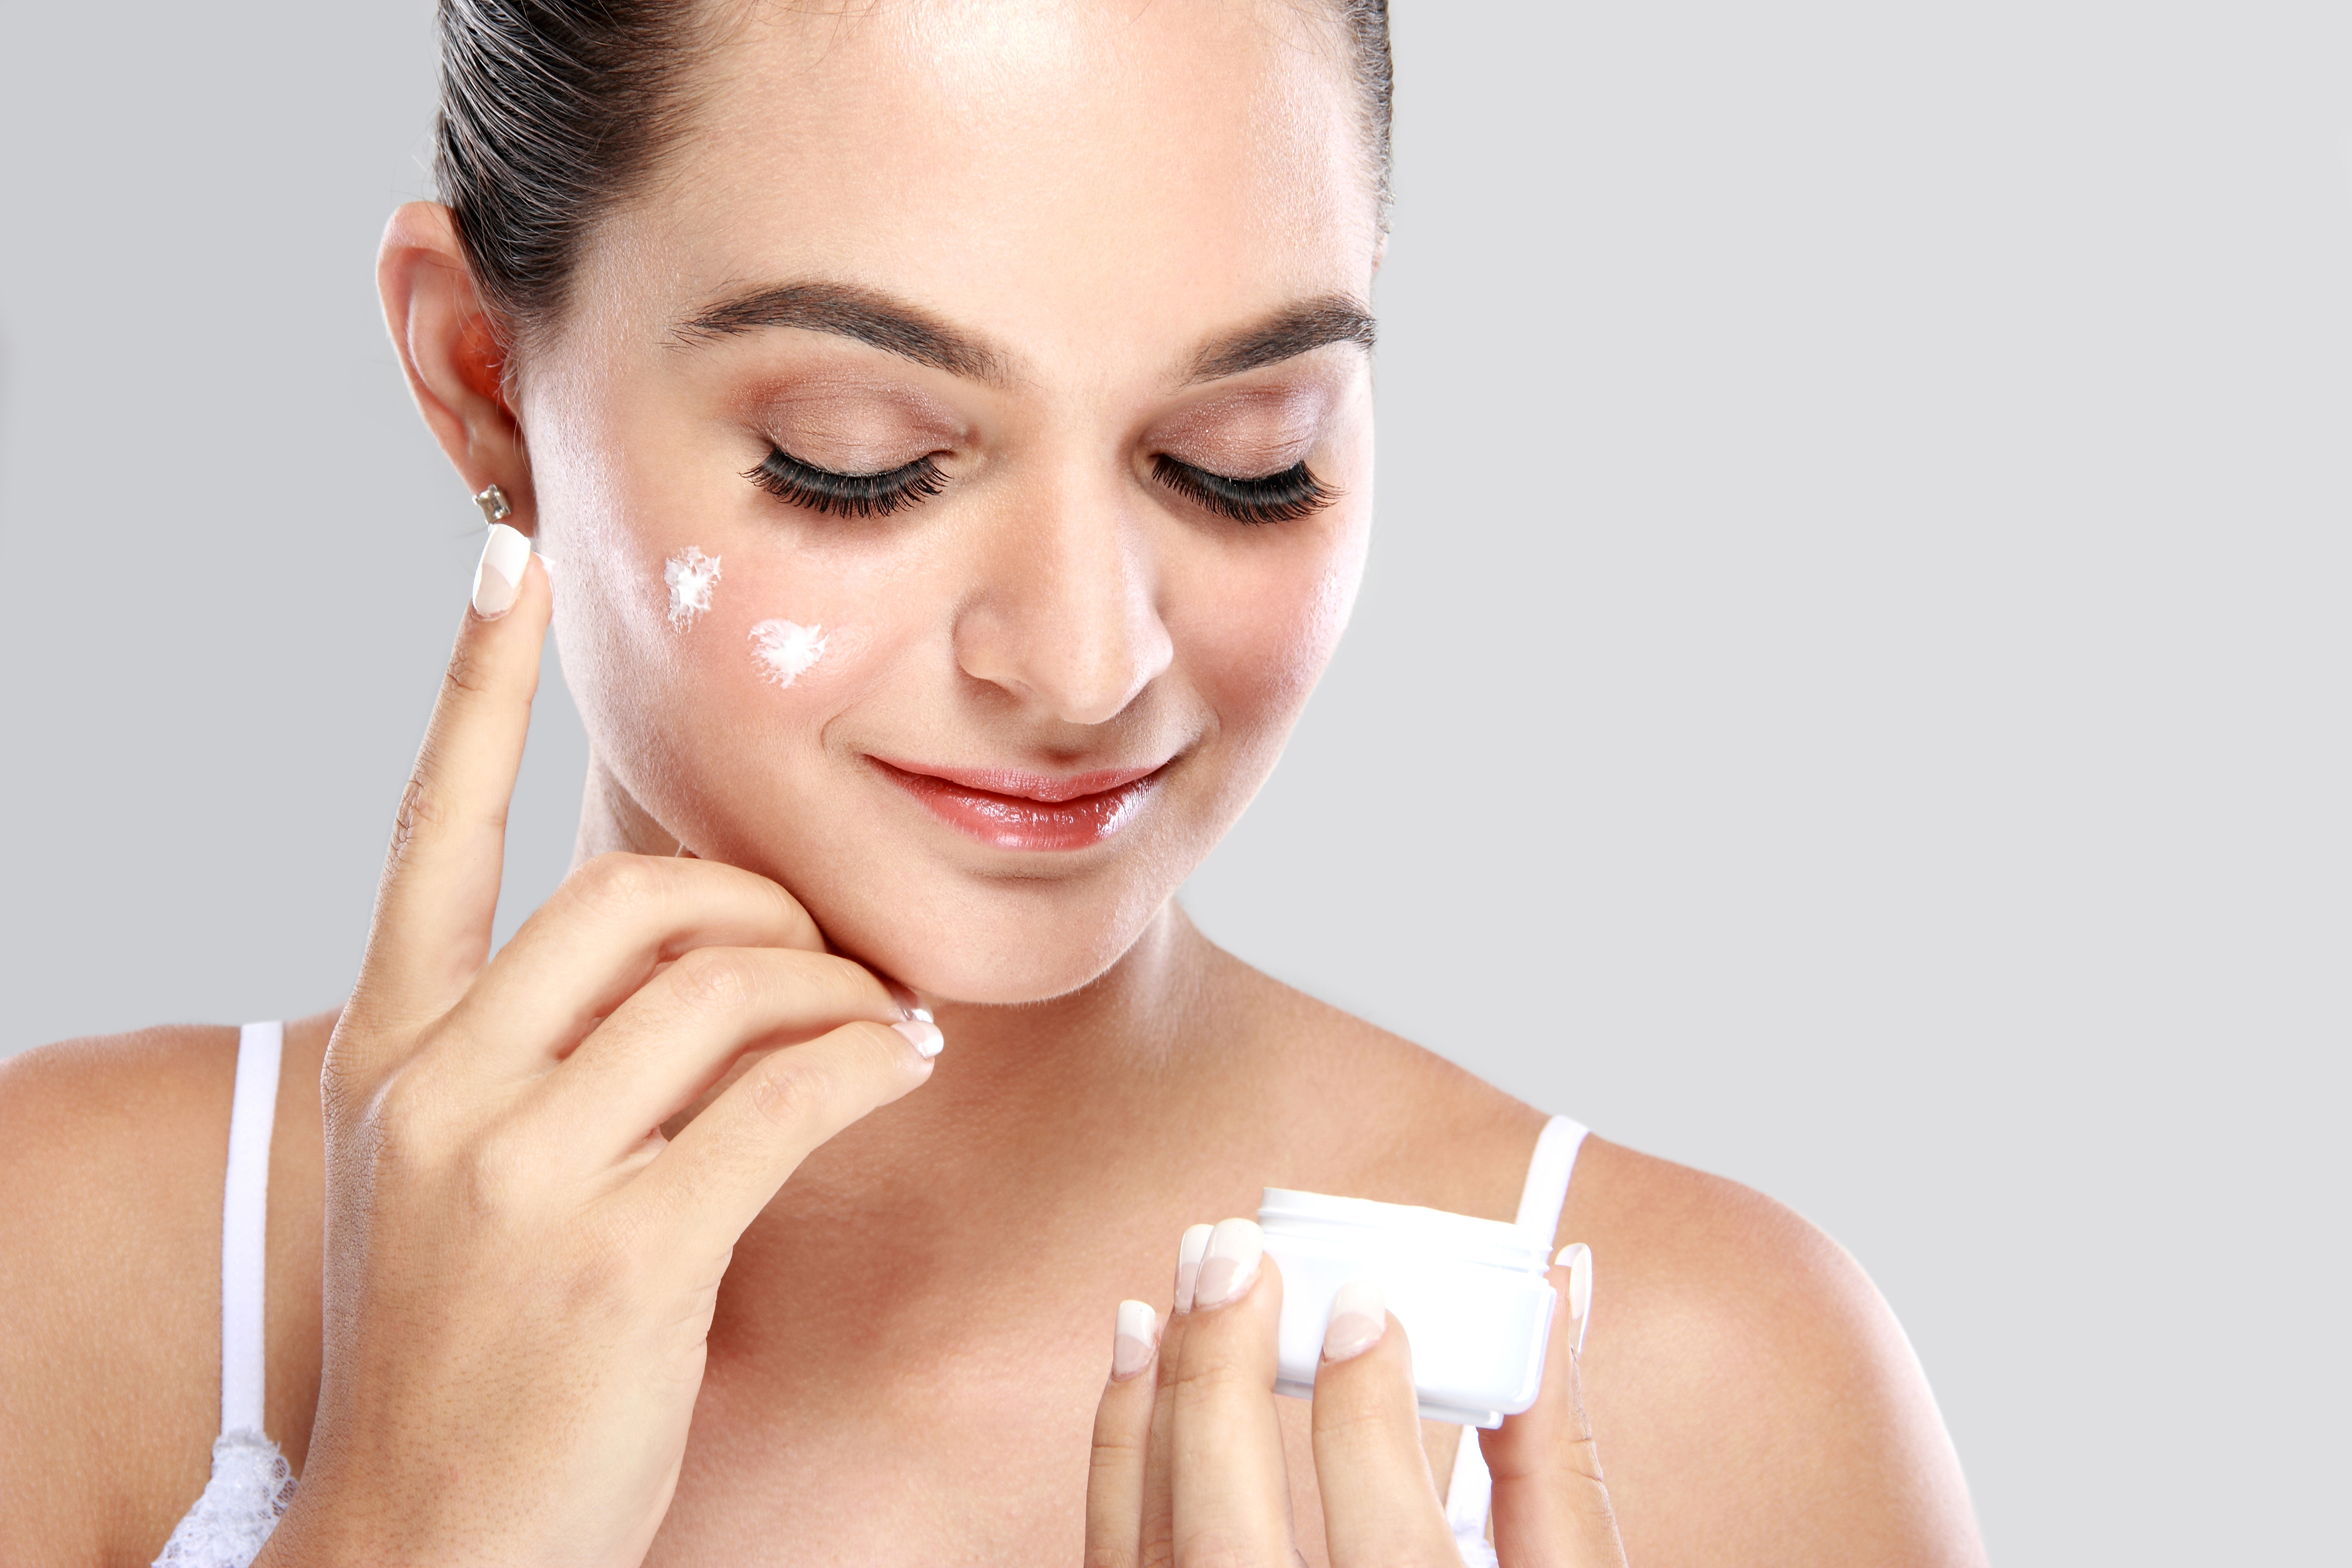 How to Keep Your Skin Healthy This Holiday Season